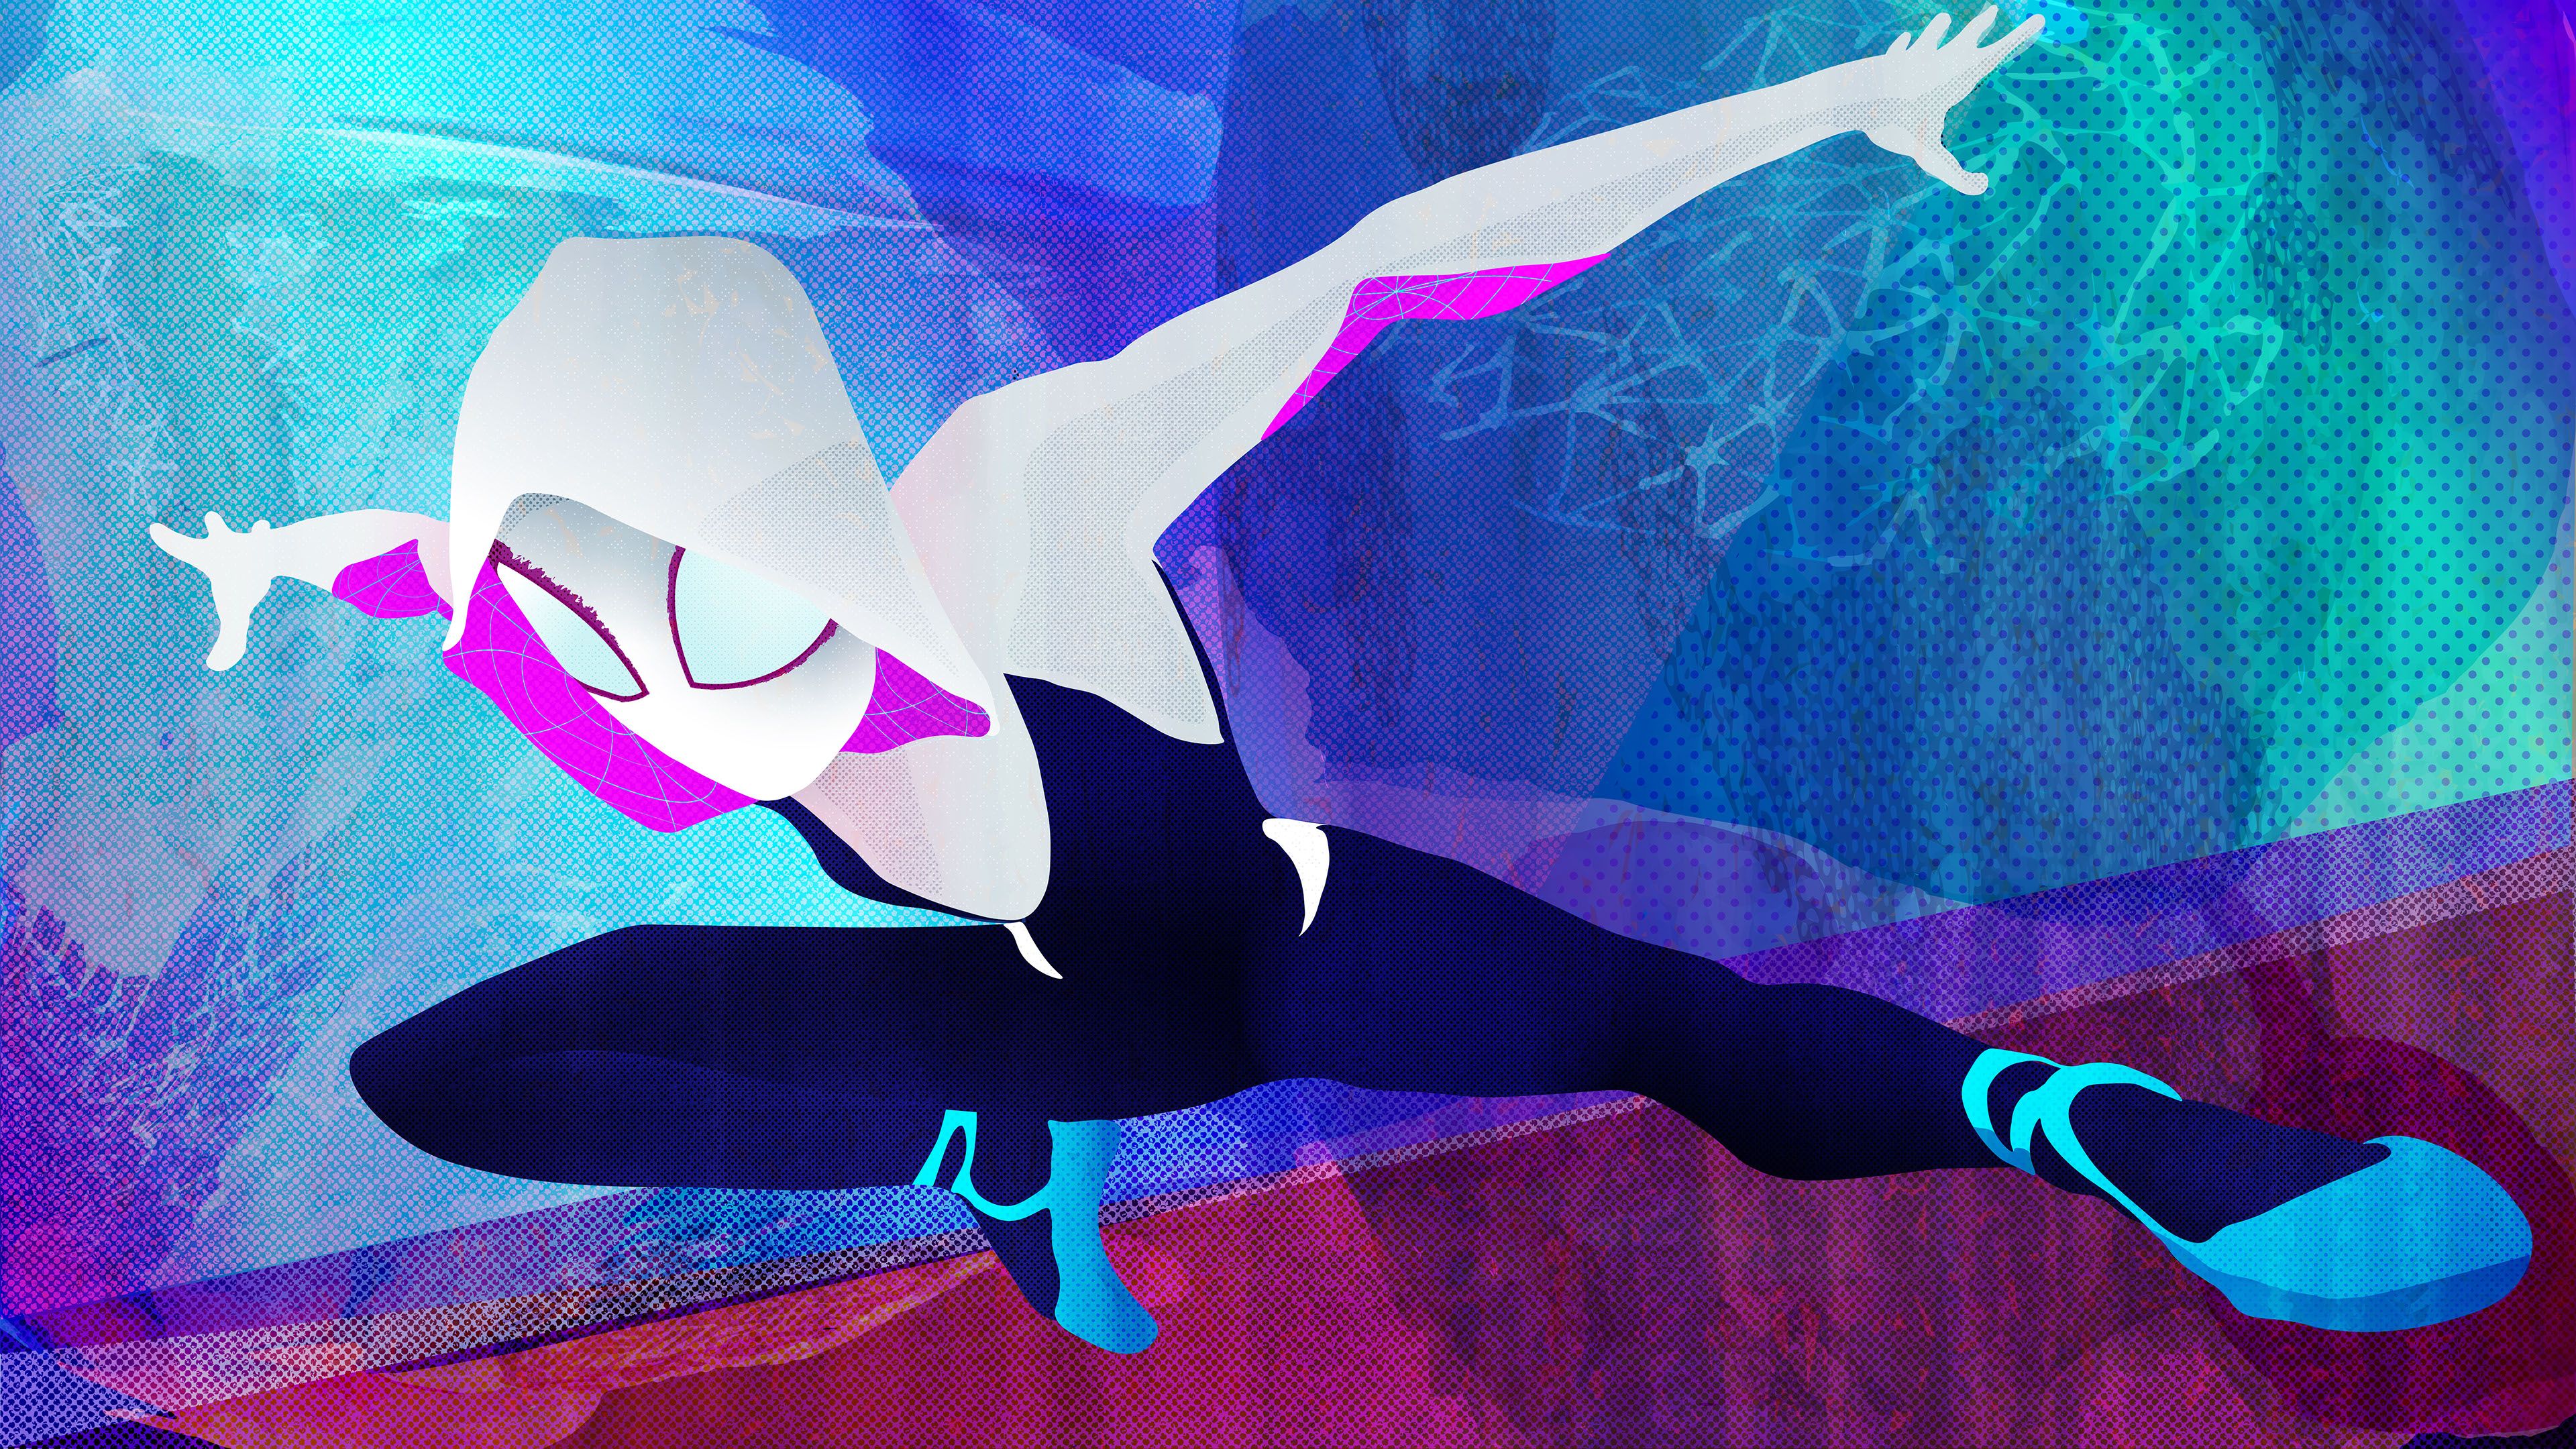 Into The Spider Verse Gwen Stacy Wallpapers Wallpaper Cave